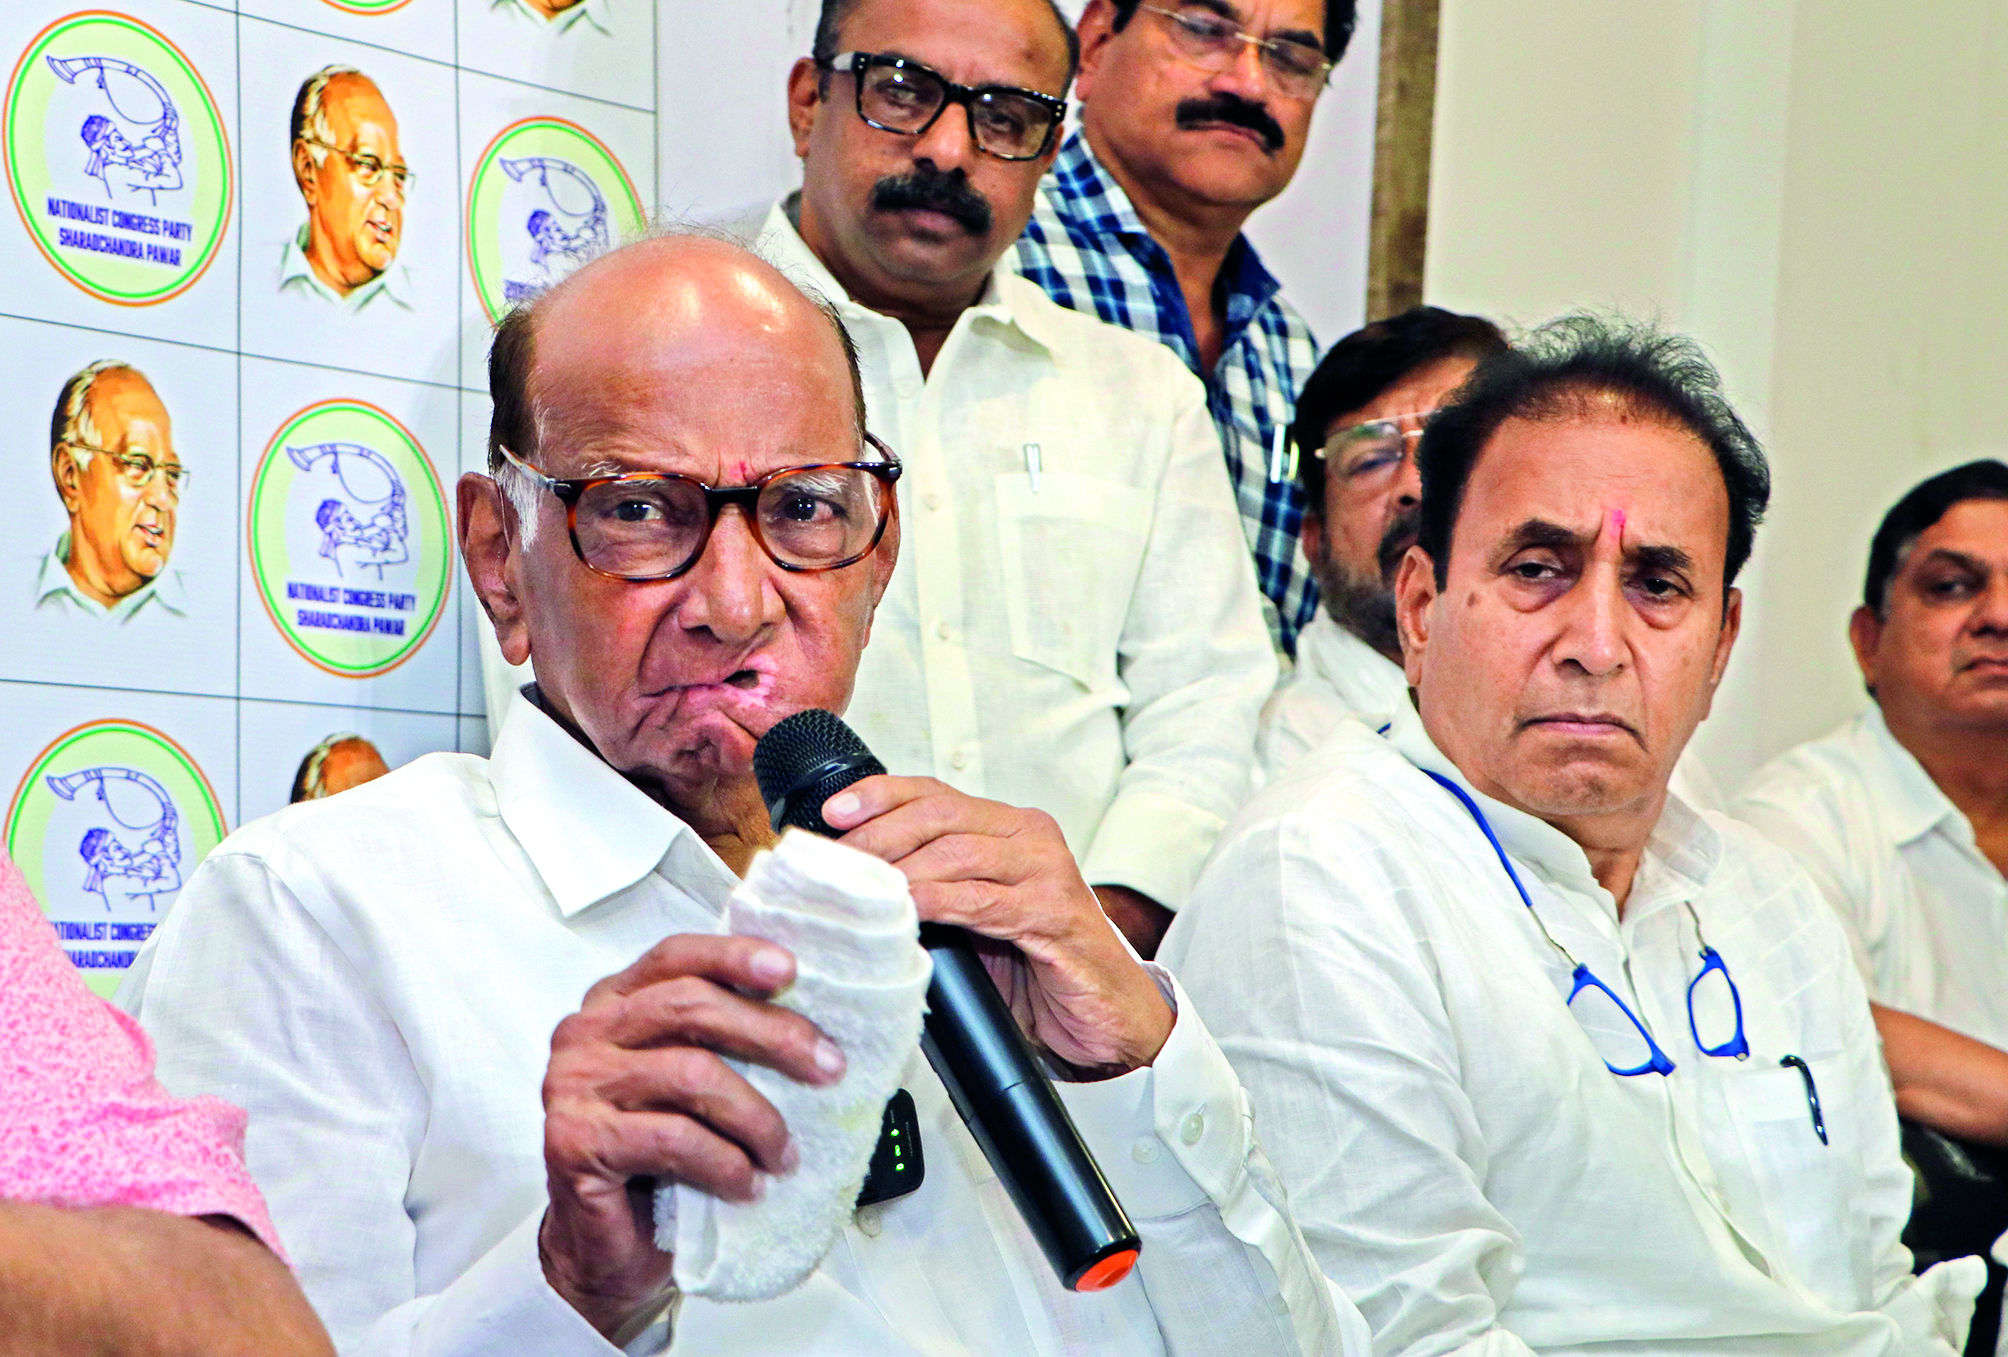 People’s mood is against PM, claims Sharad Pawar; slams Centre over China